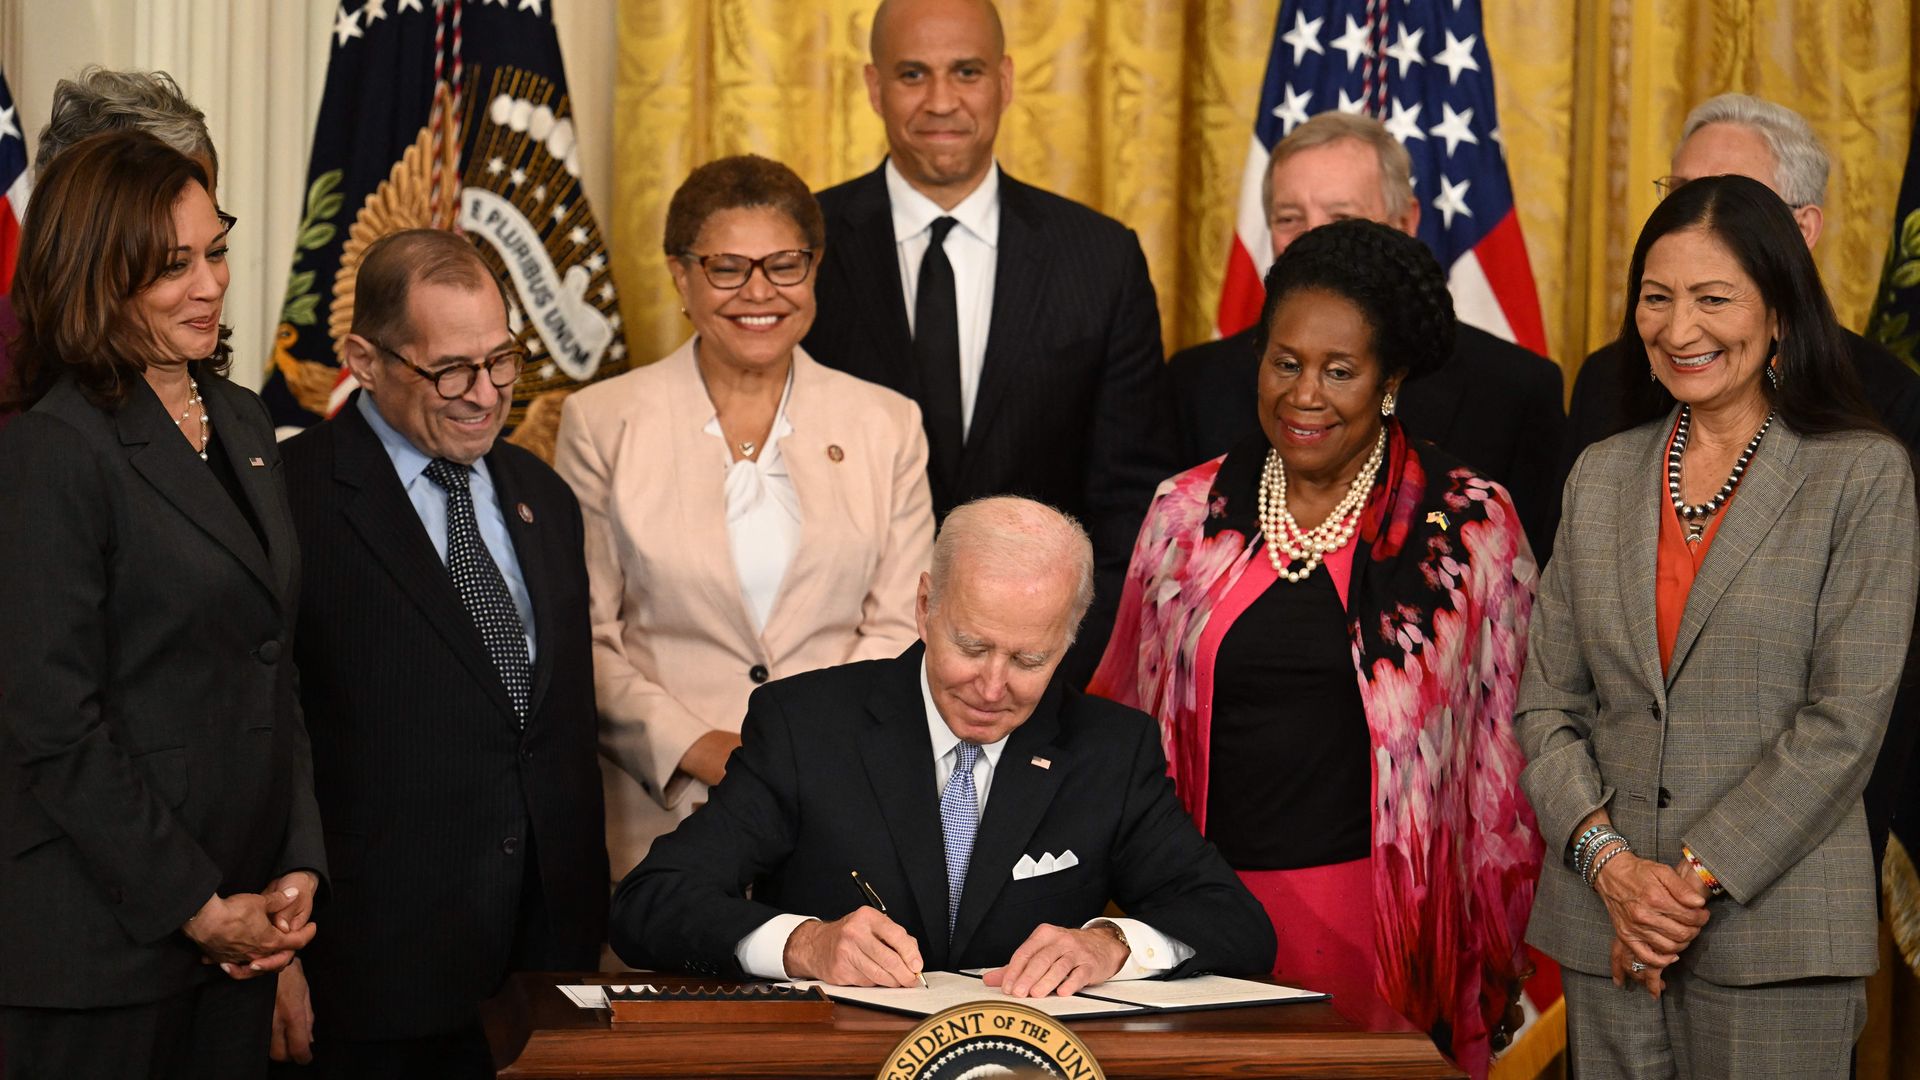 Photo of Joe Biden signing a bill at a desk while people stand around him smiling